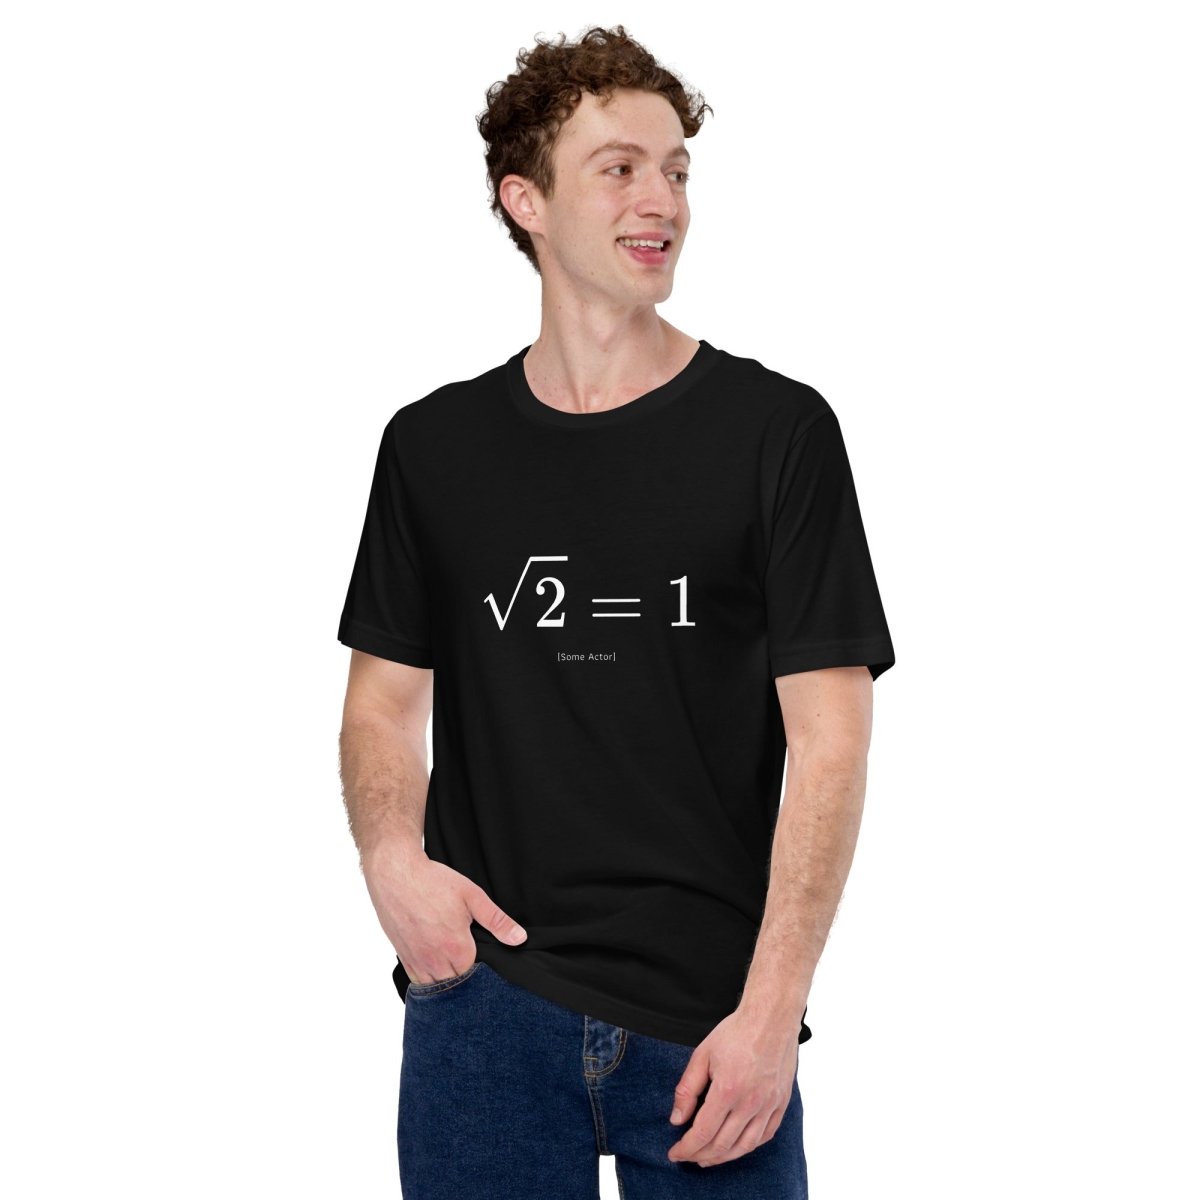 The Square Root of 2 Equals 1 T - Shirt (unisex) - Black - AI Store